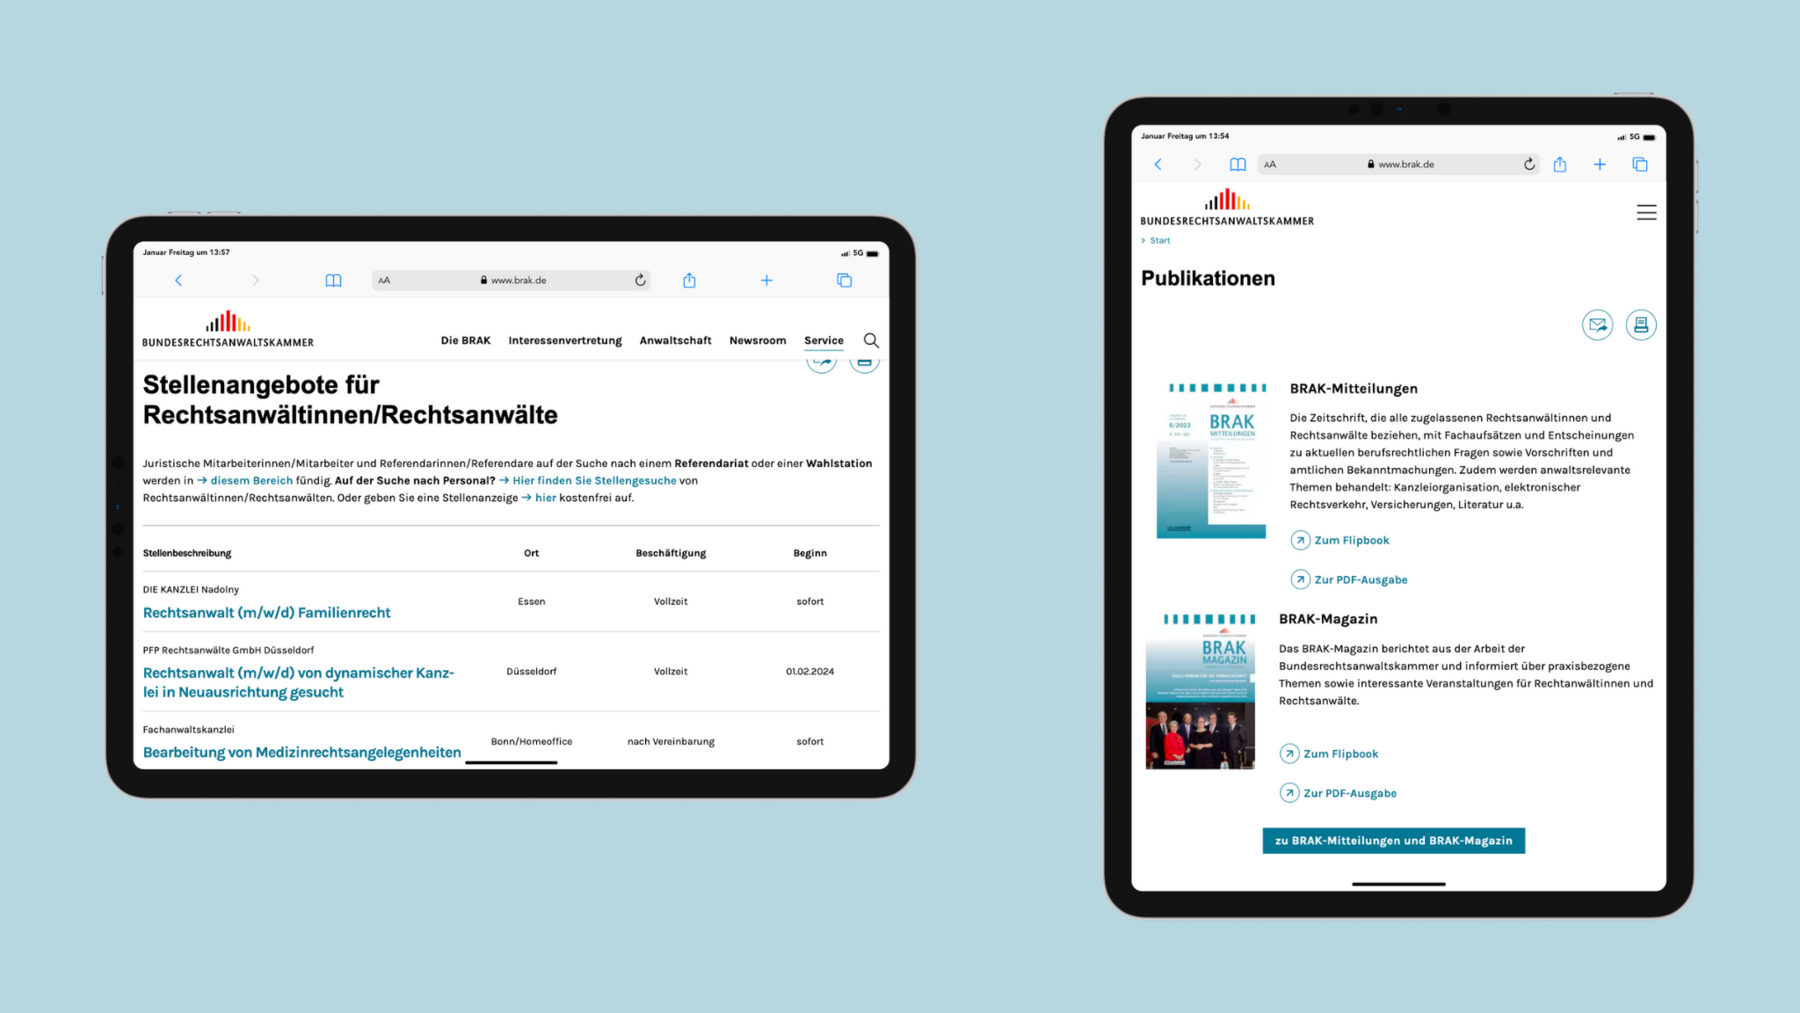 View of the job board page and the publication page on tablets.